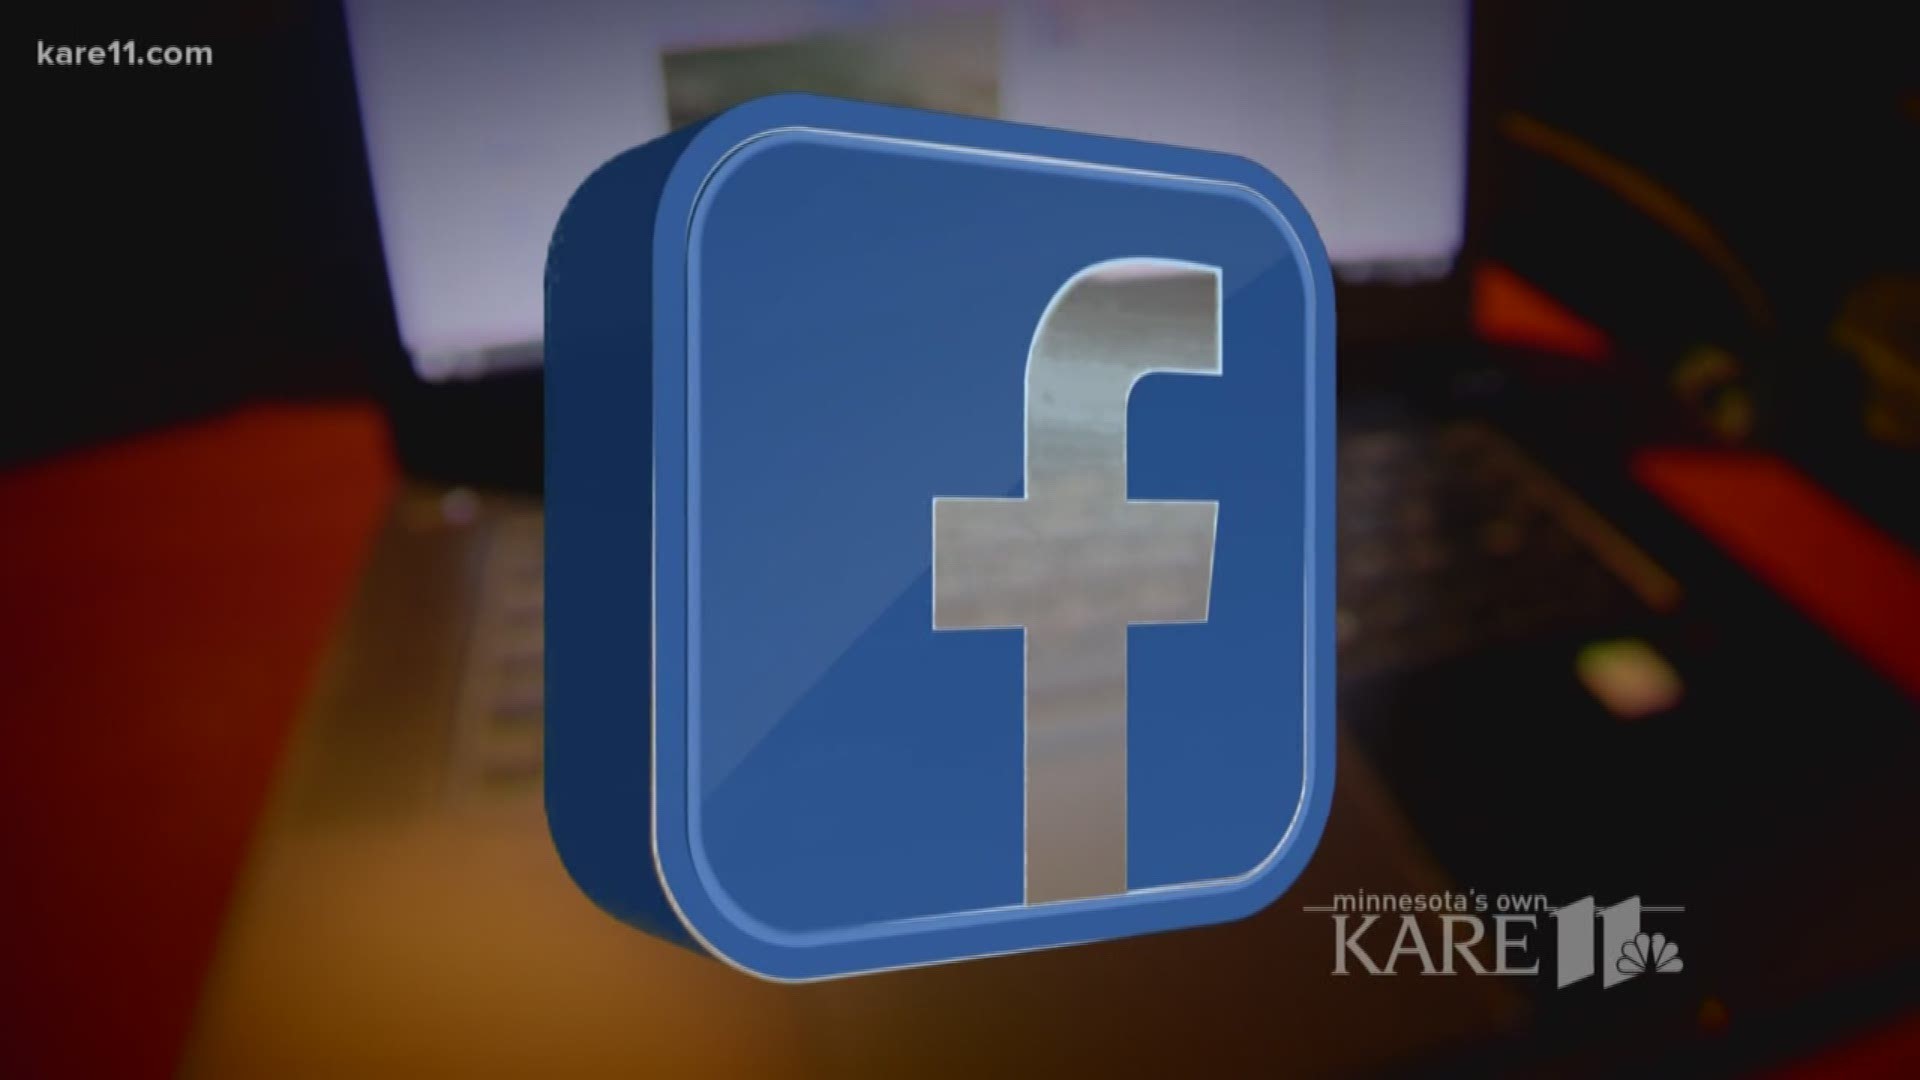 Growing frustration that the policies are unclear and inconsistently enforced compelled Facebook to open up about how these decisions get made. https://kare11.tv/2qYjLeT